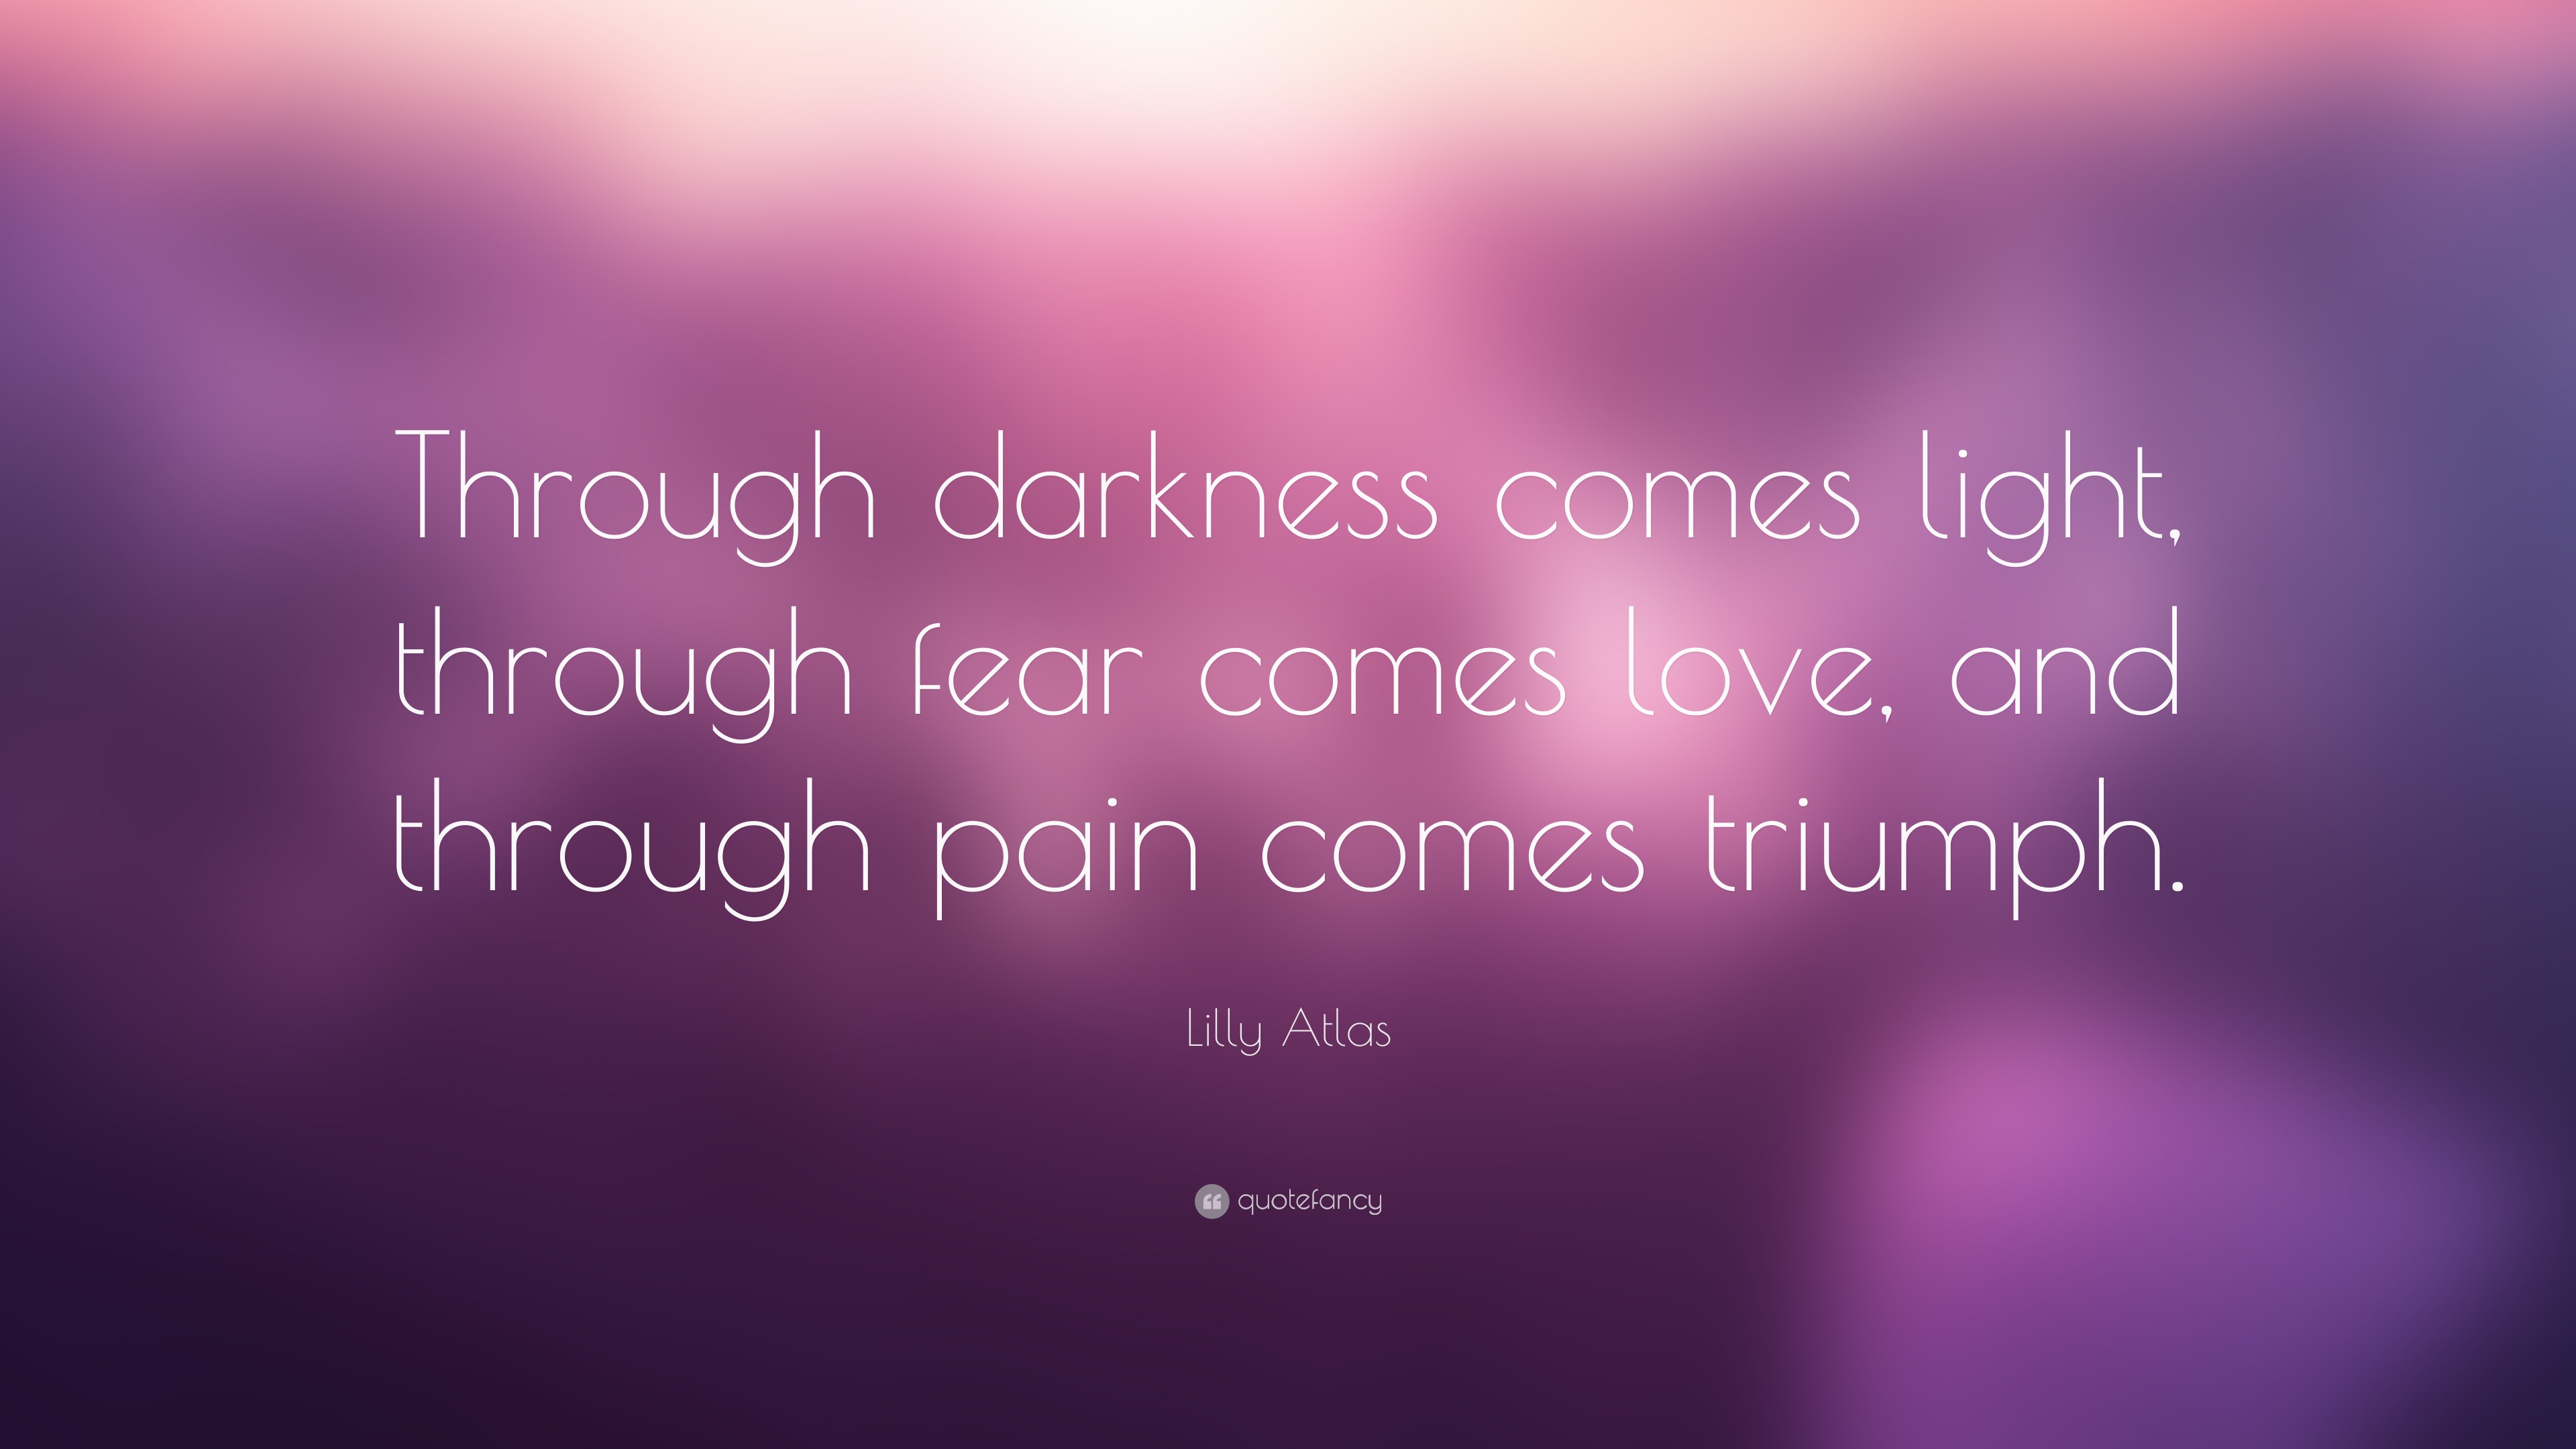 Lilly Atlas Quote: “Through darkness comes through fear comes love, through triumph.”